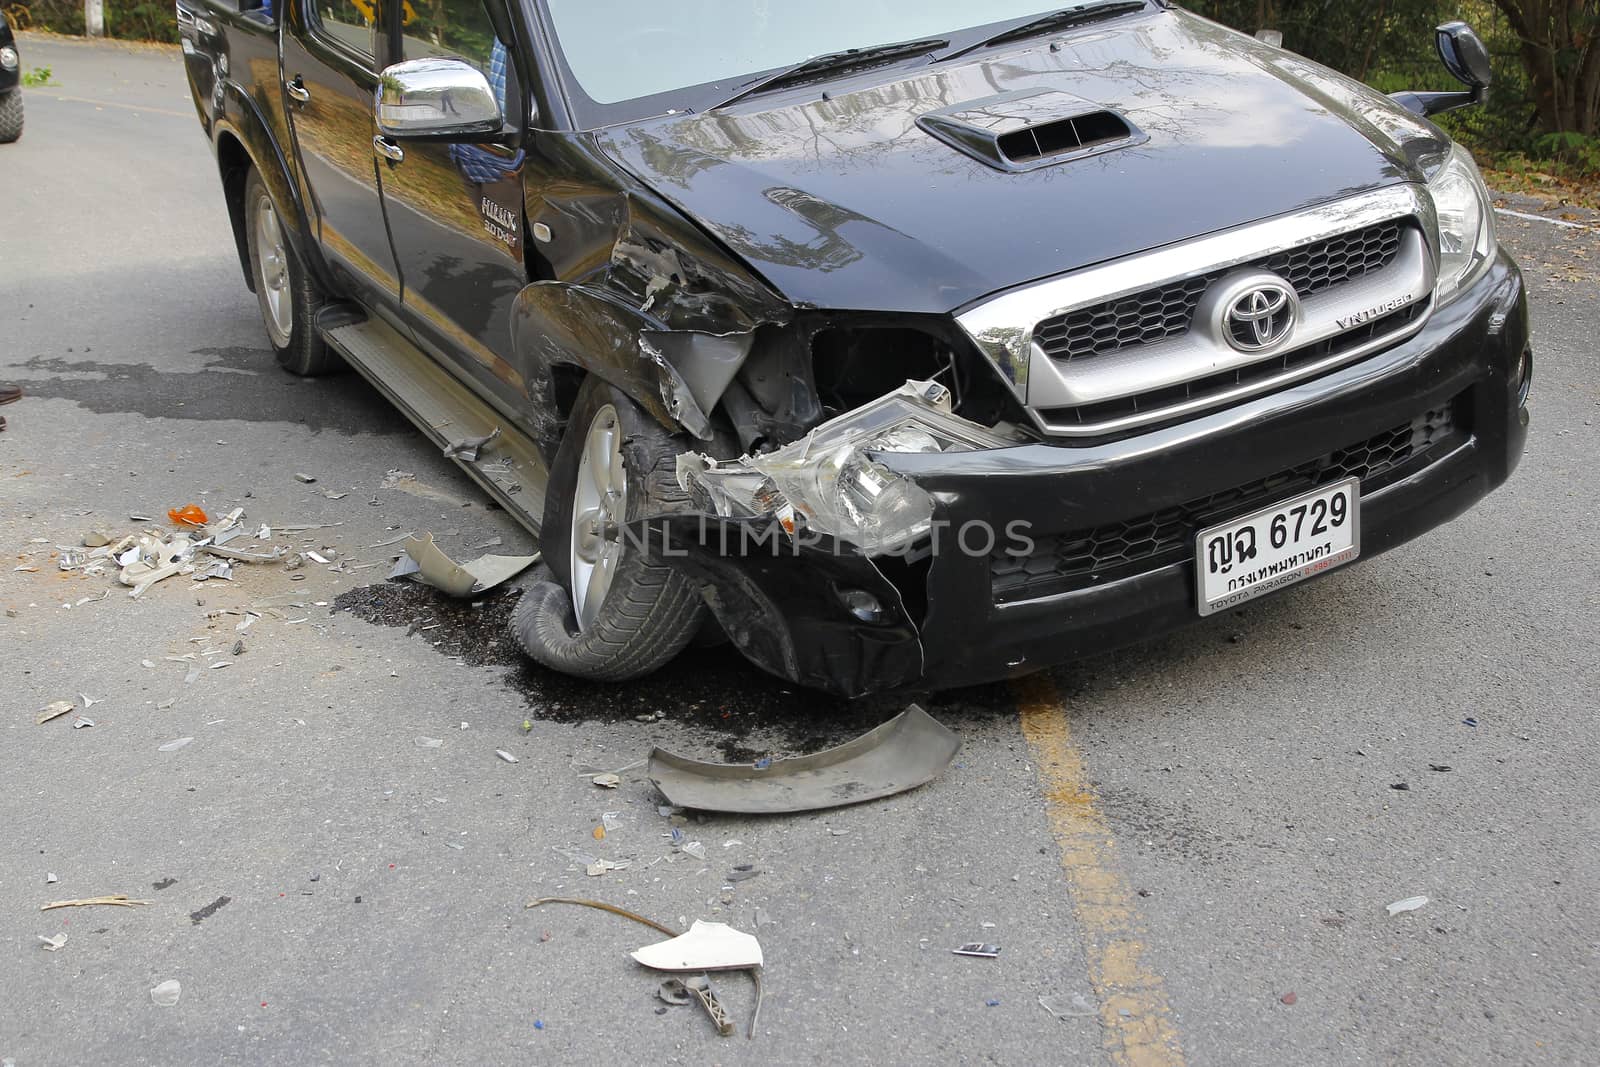 pickup accident on road,car accident in national park ,Thailand on 1 January 2015